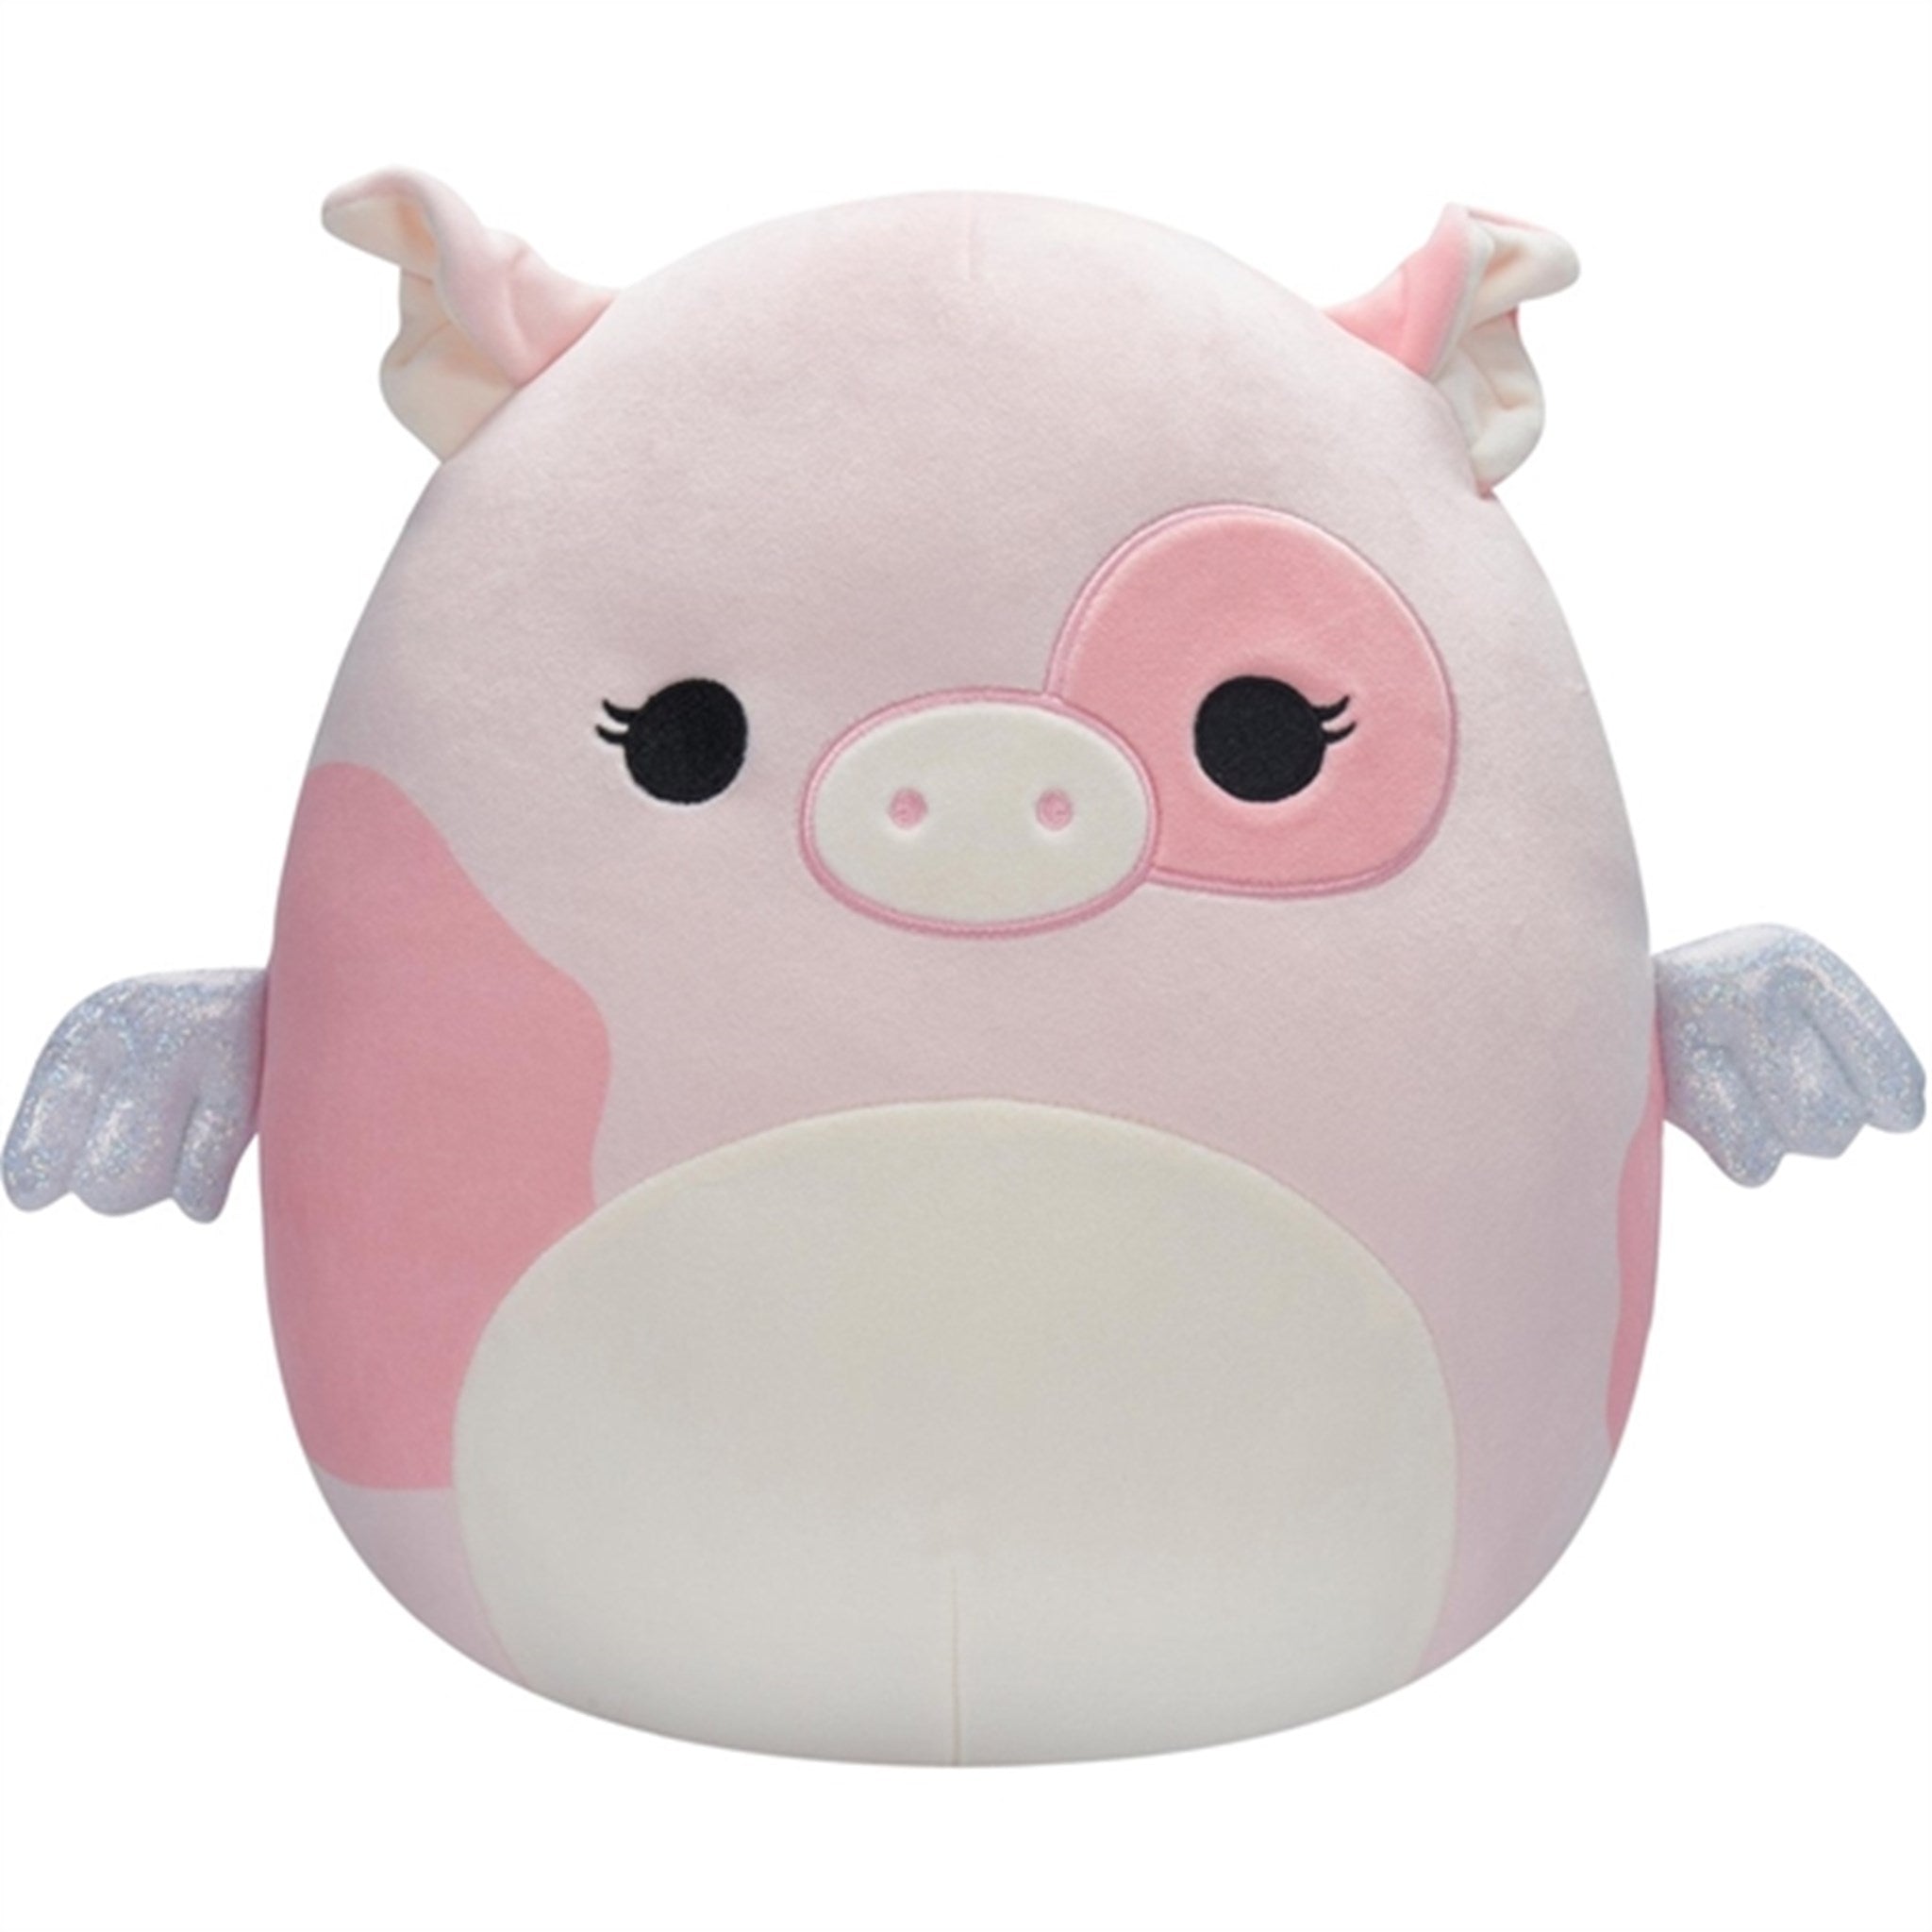 Squishmallows Peety the Pink Pig 30 cm P14